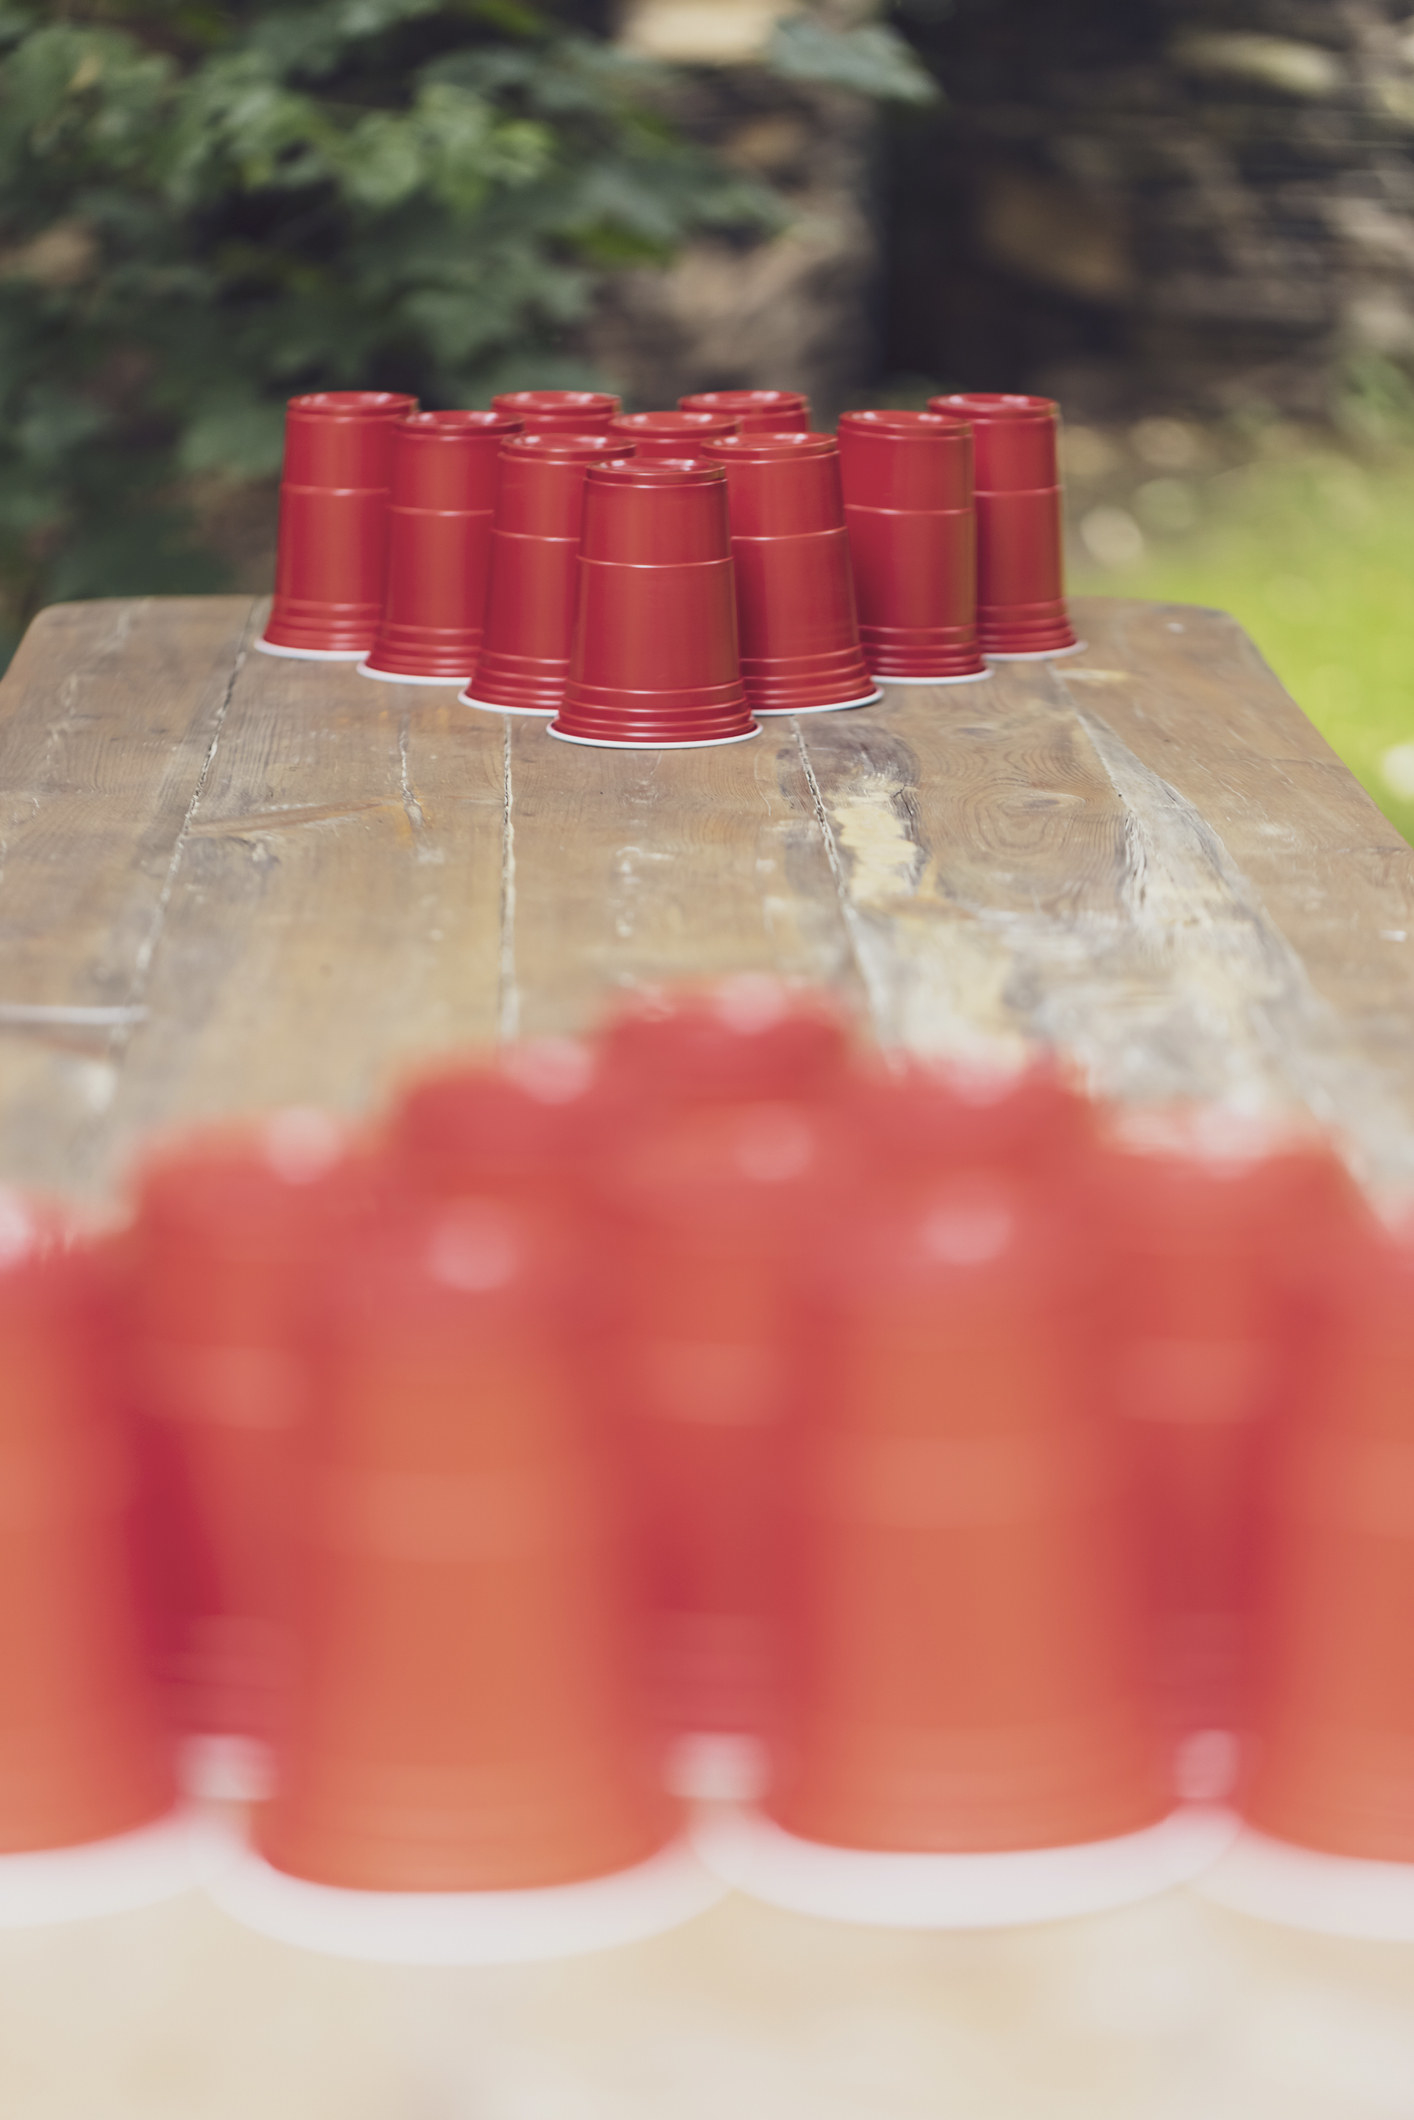 Beer pong table with red cups.